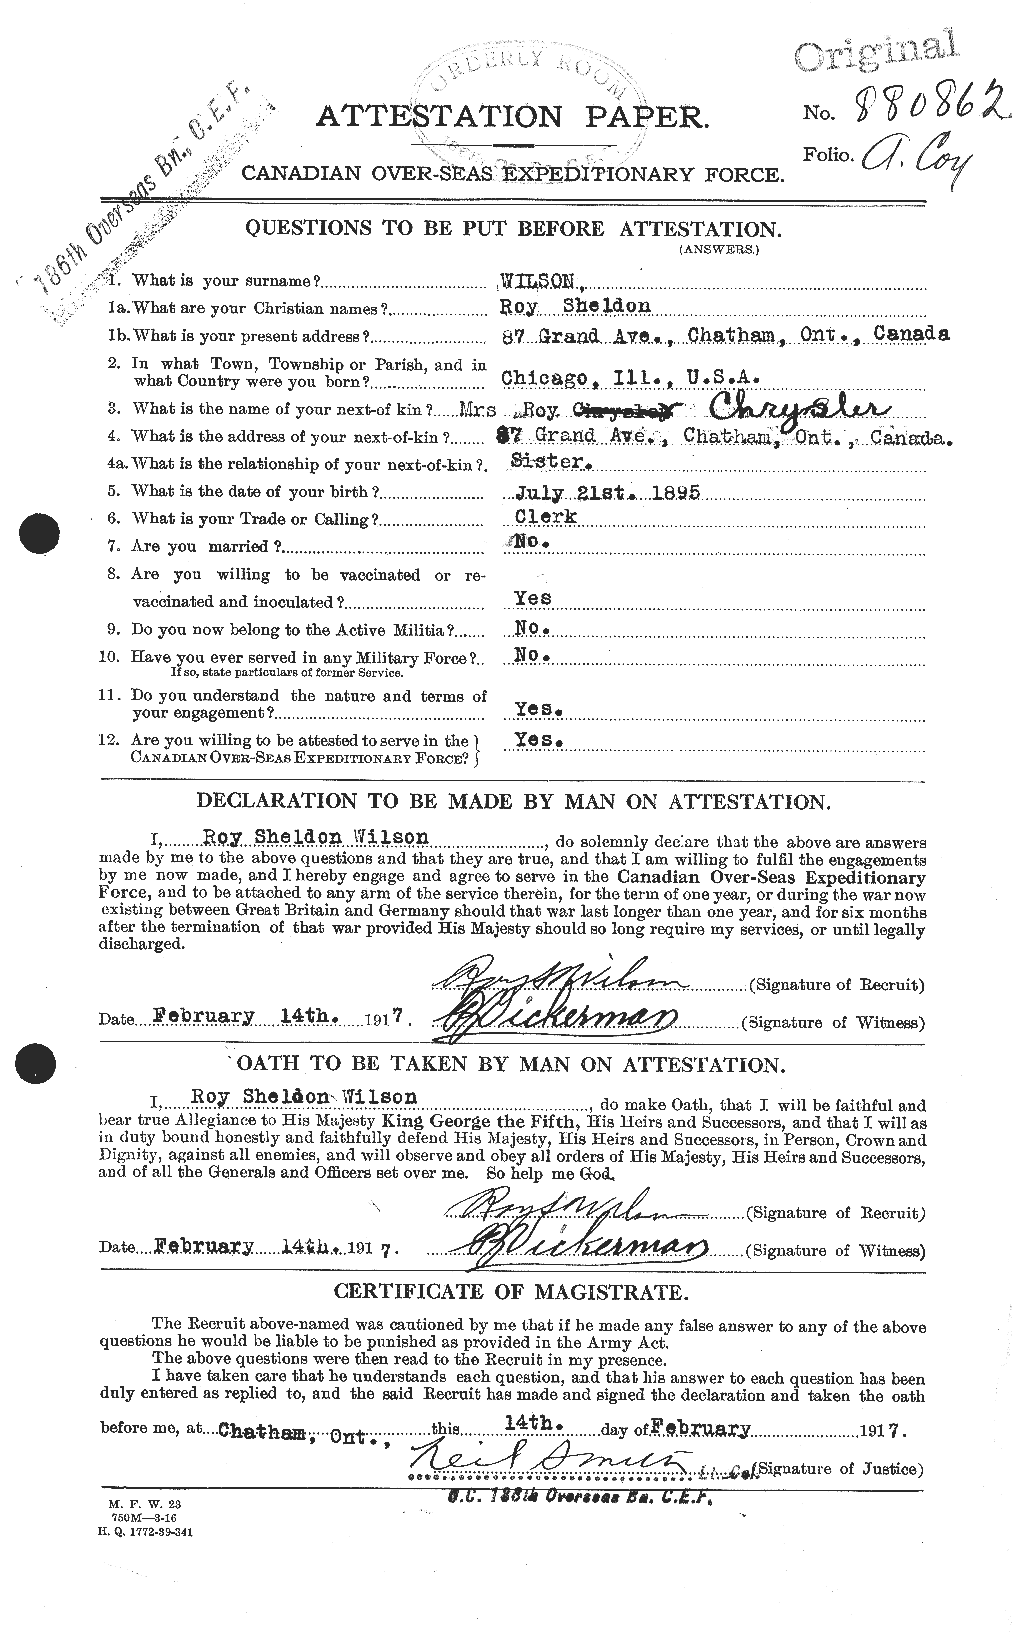 Personnel Records of the First World War - CEF 681065a